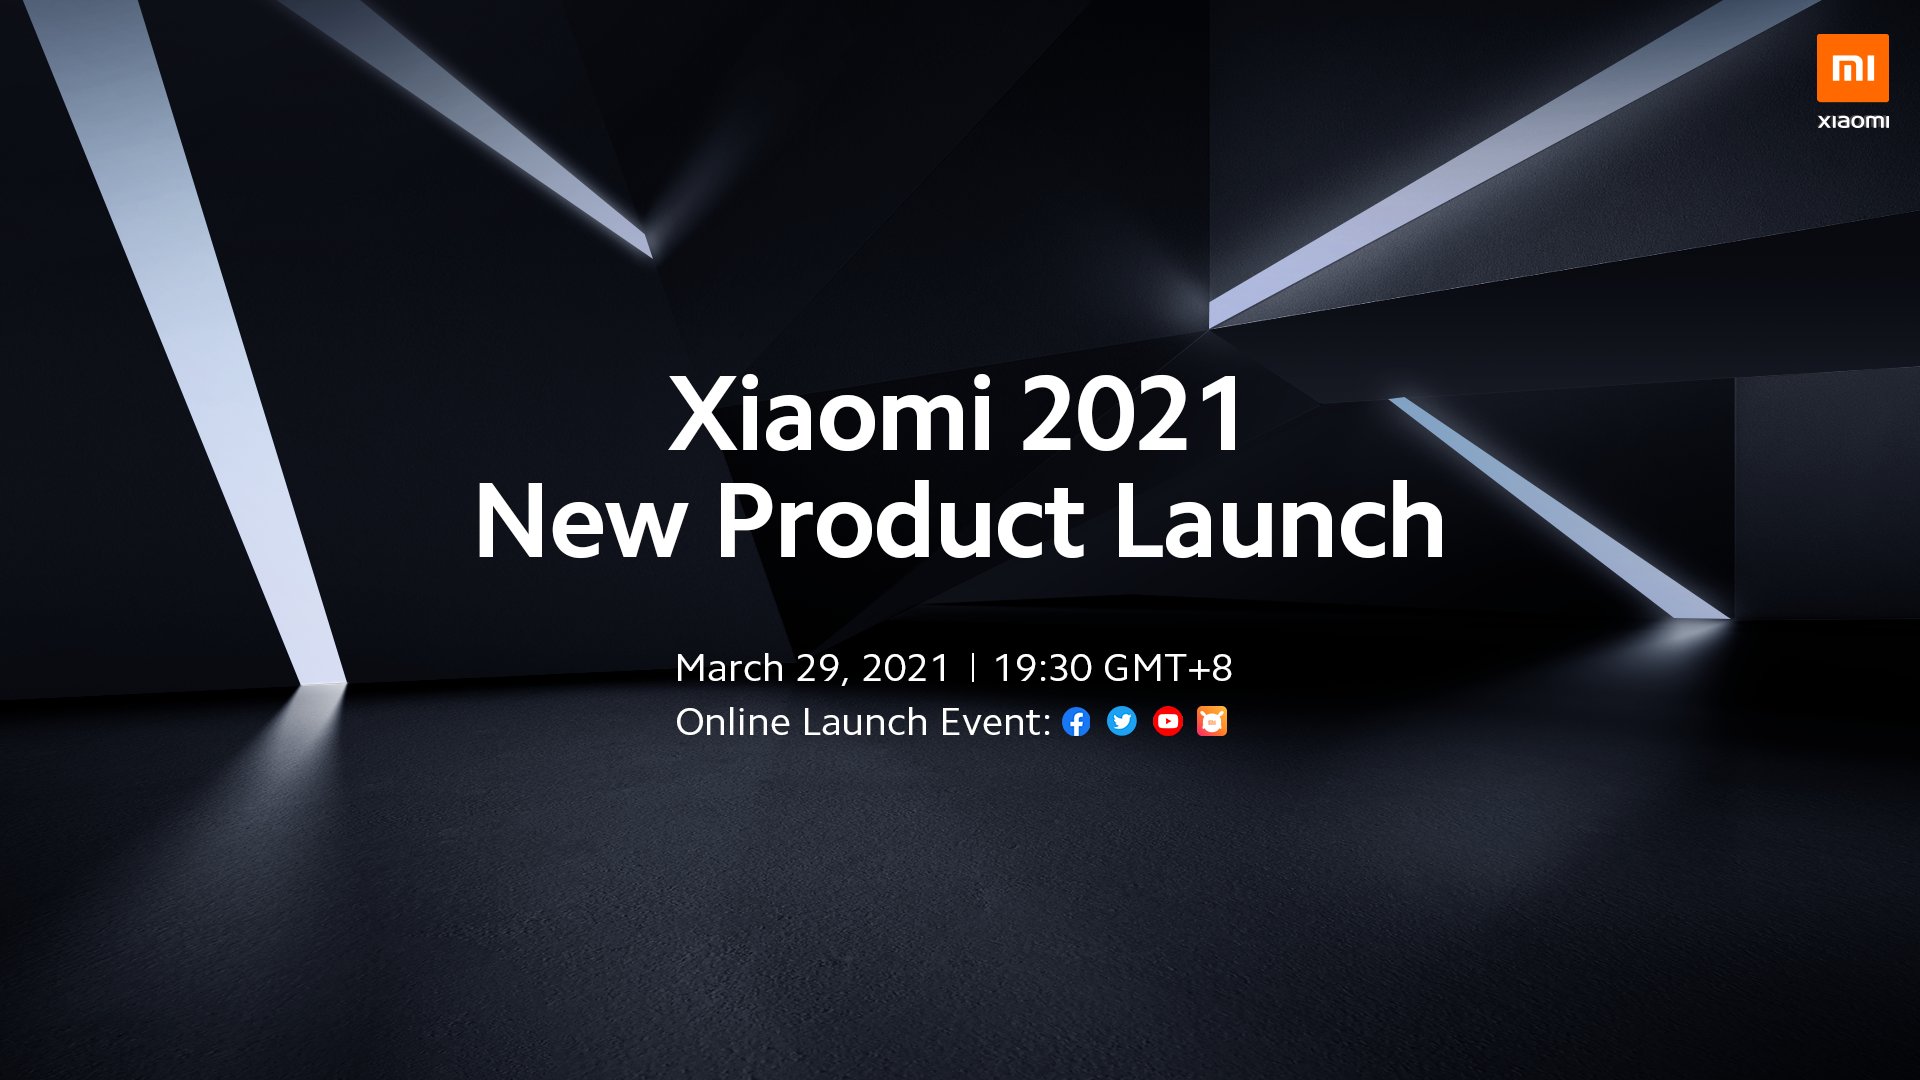 Xiaomi 2021 New Product Launch Event